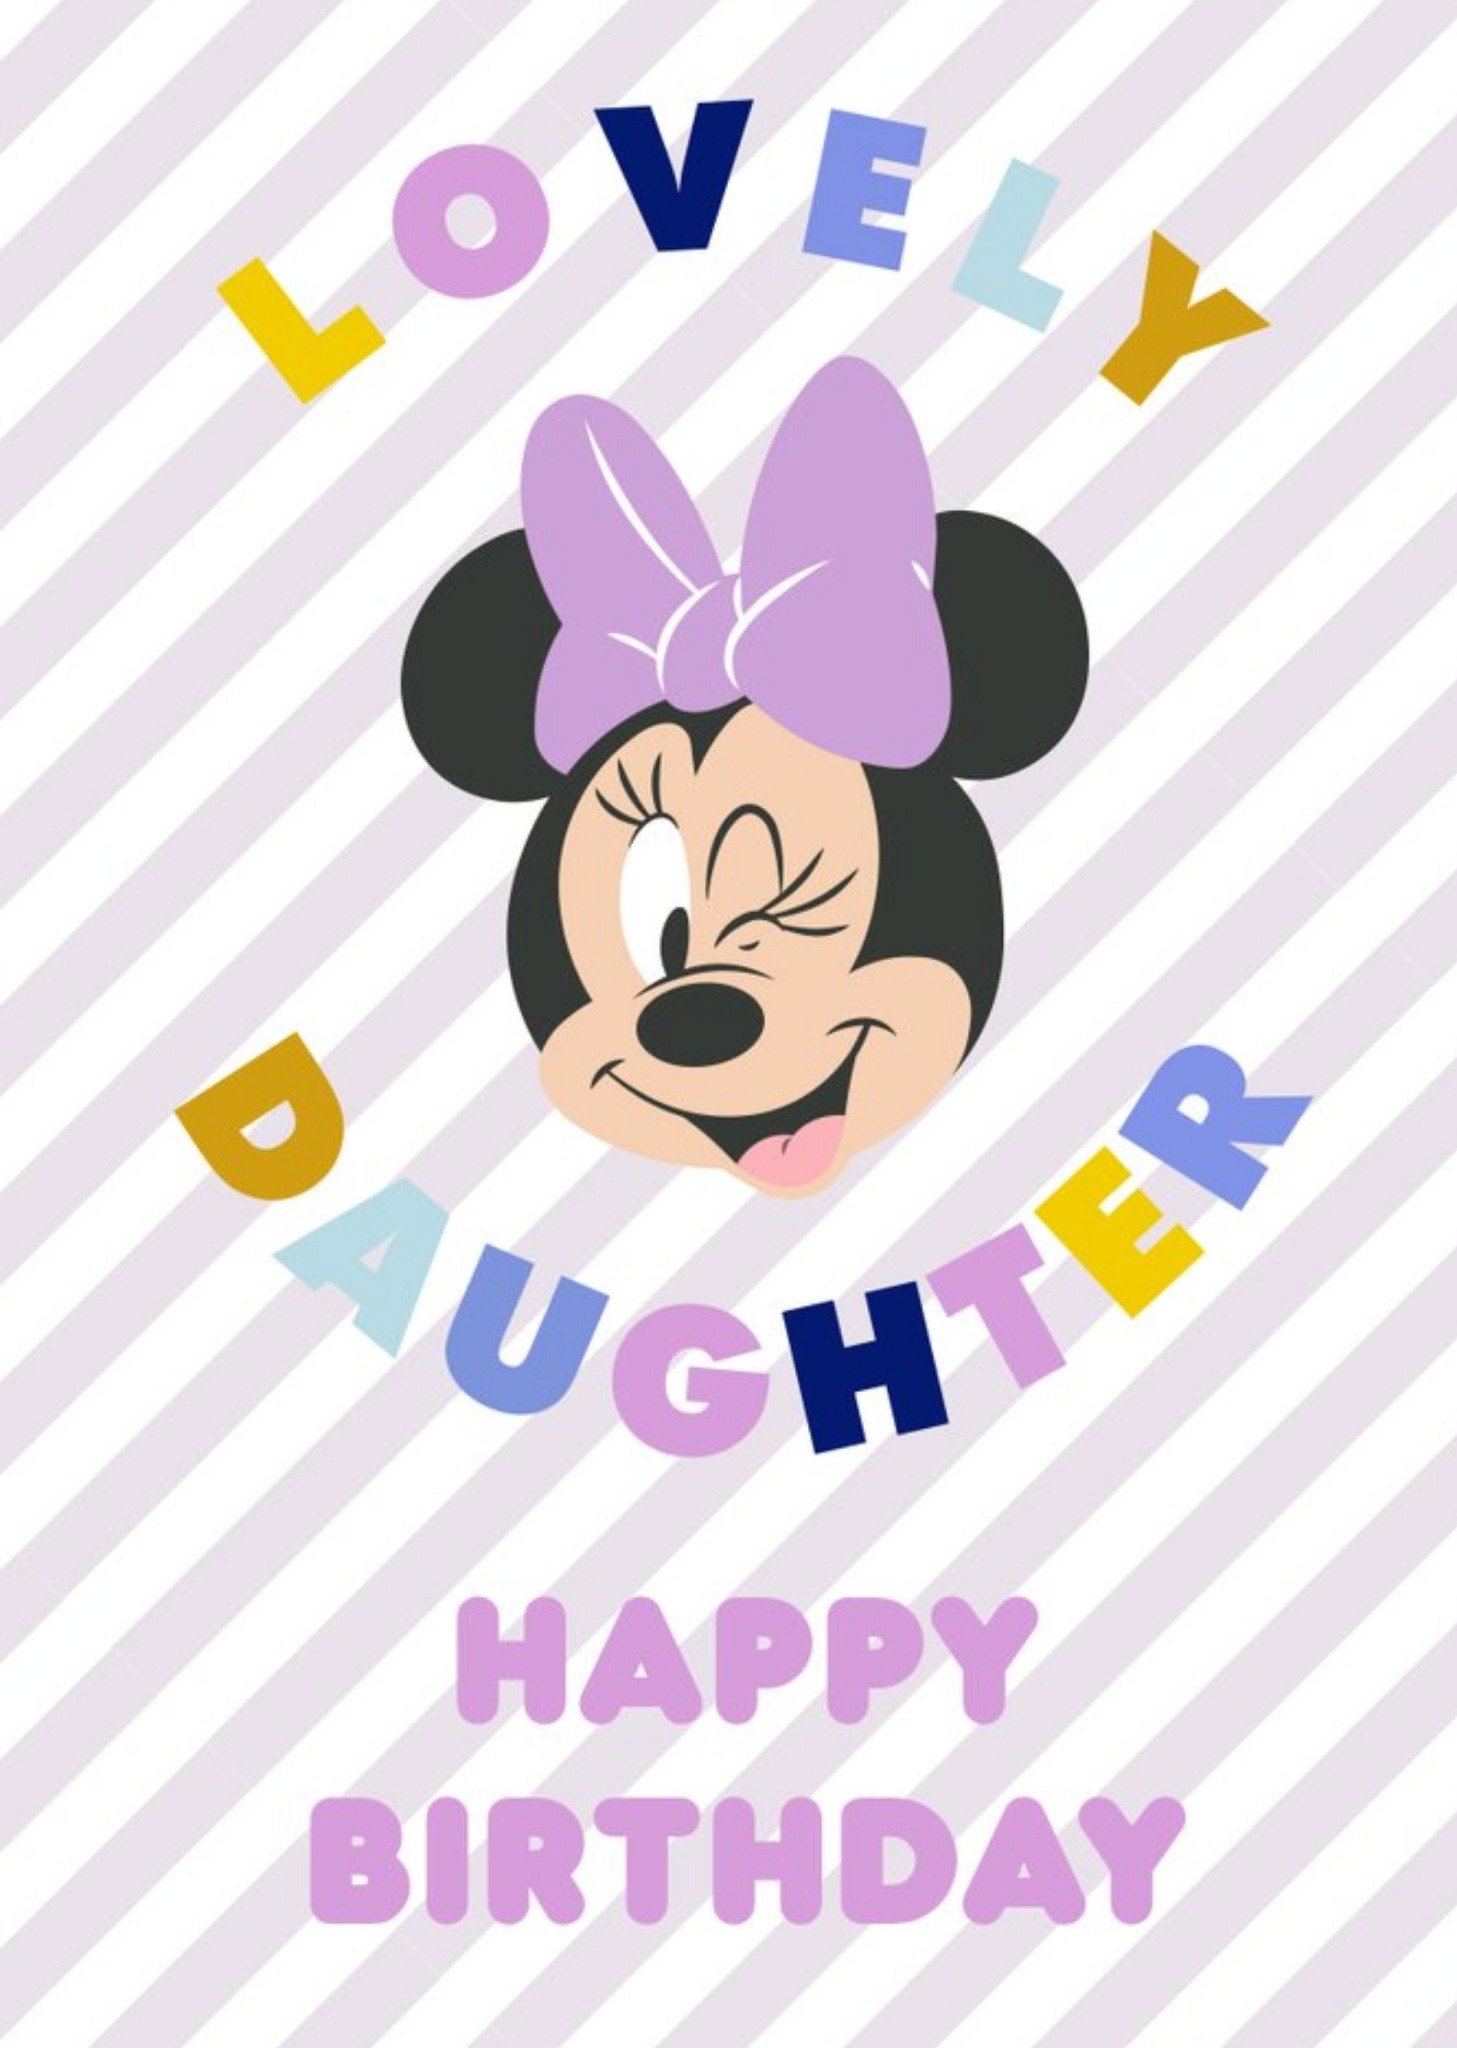 Disney Minnie Mouse Lovely Daughty Happy Birthday Card, Large